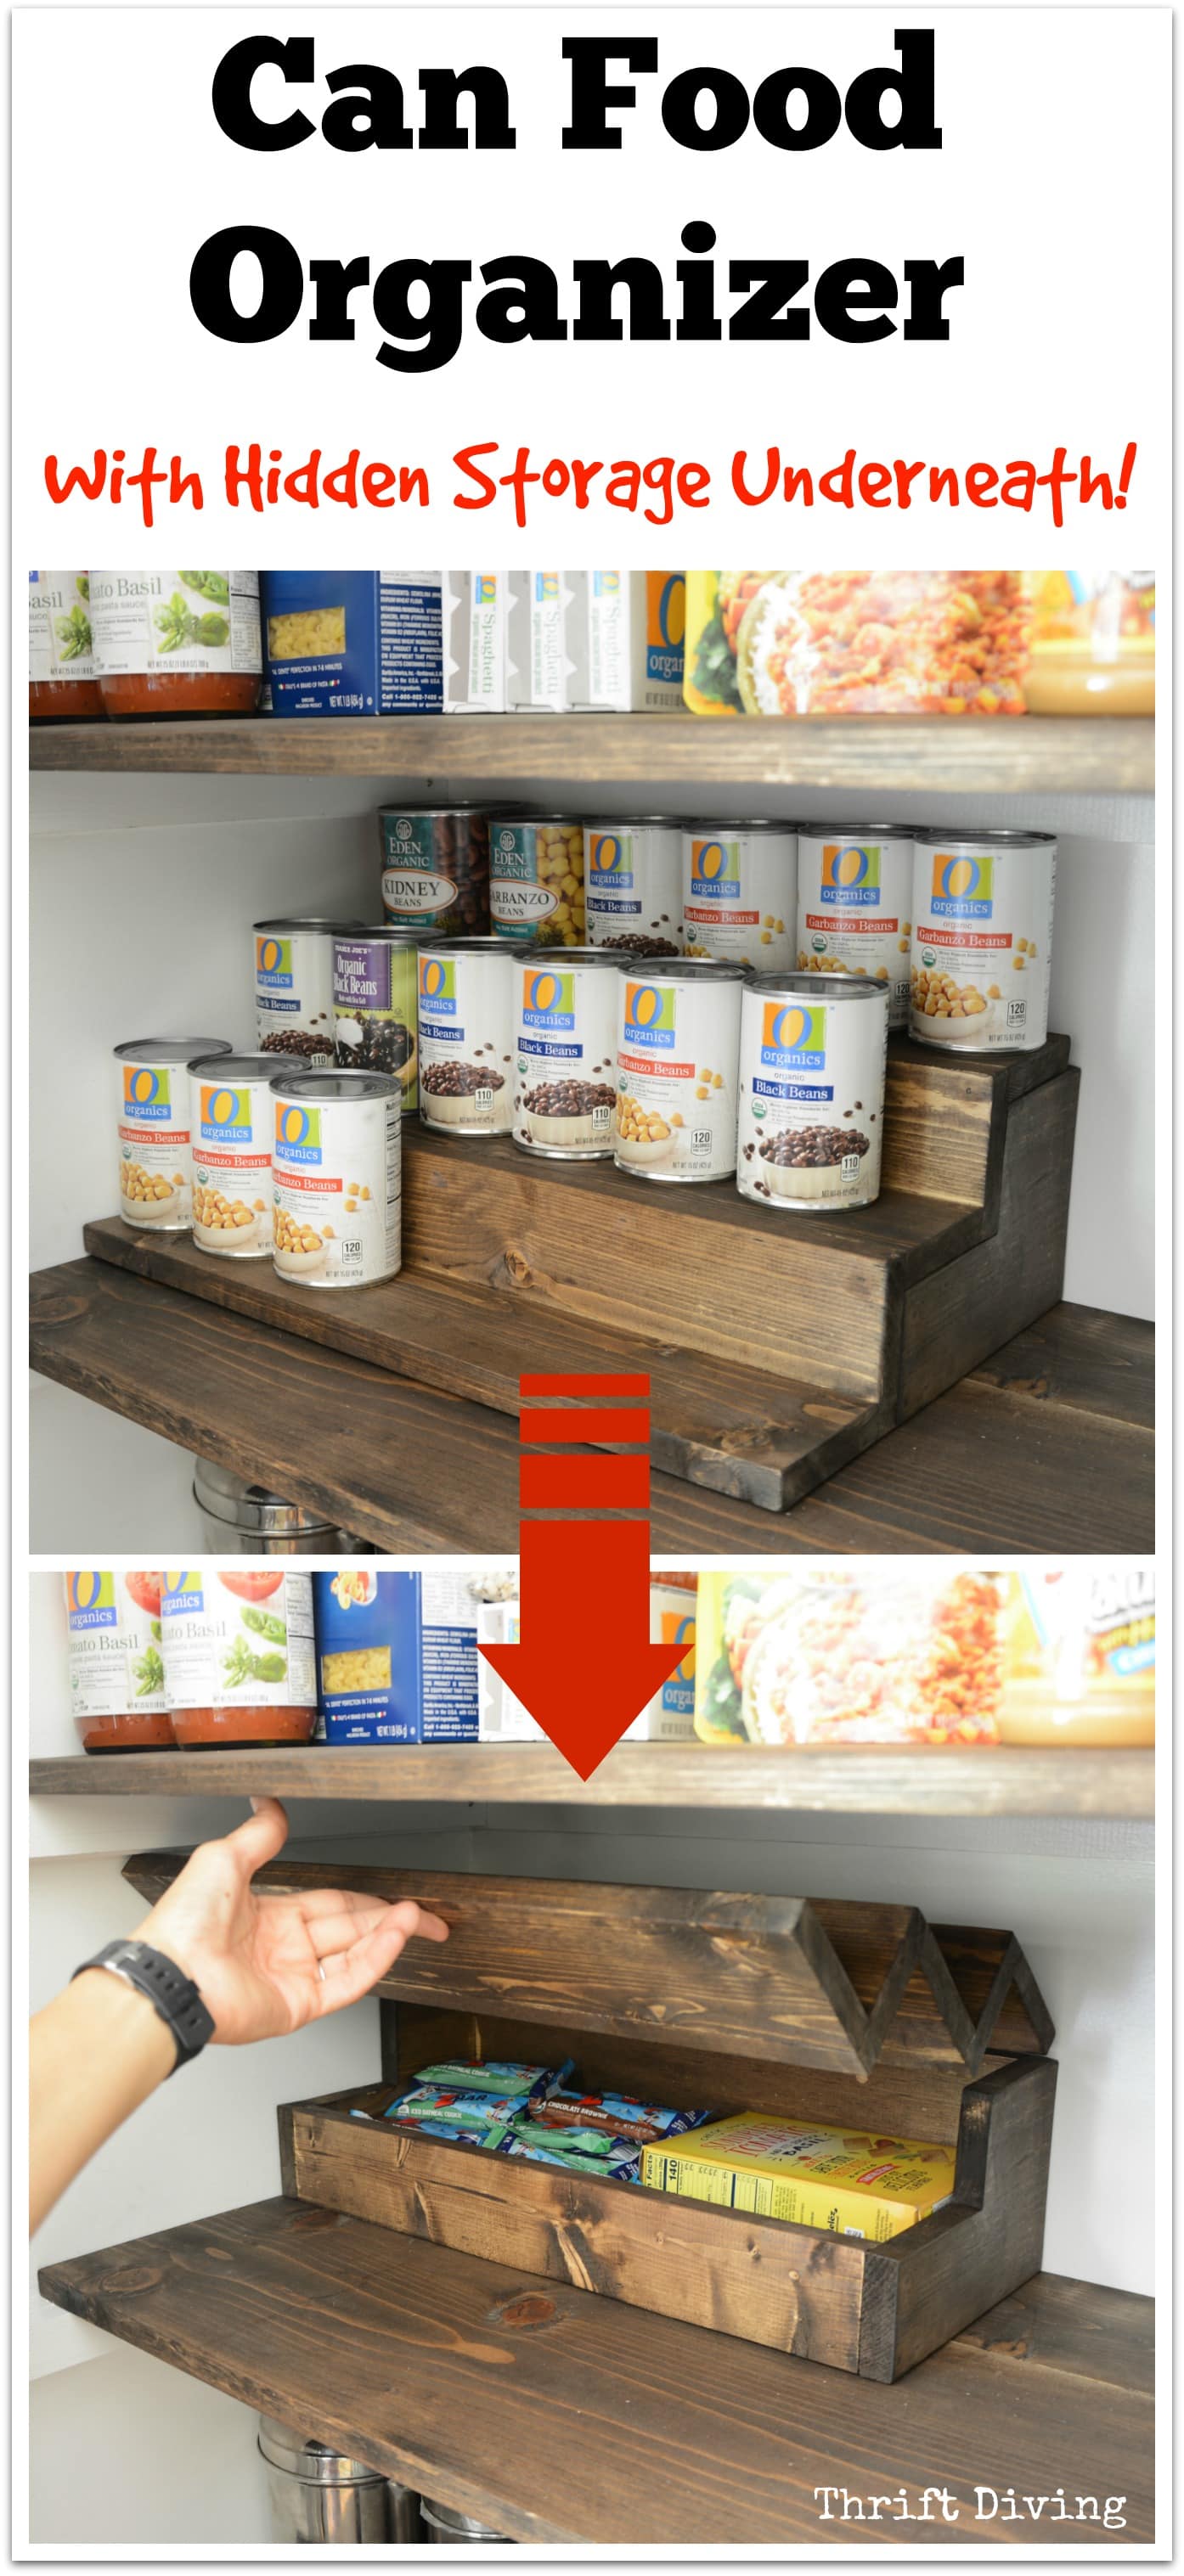 Can Food Organizer with Hidden Storage Underneath - Hide treats and snacks from your kids! - Thrift Diving Blog